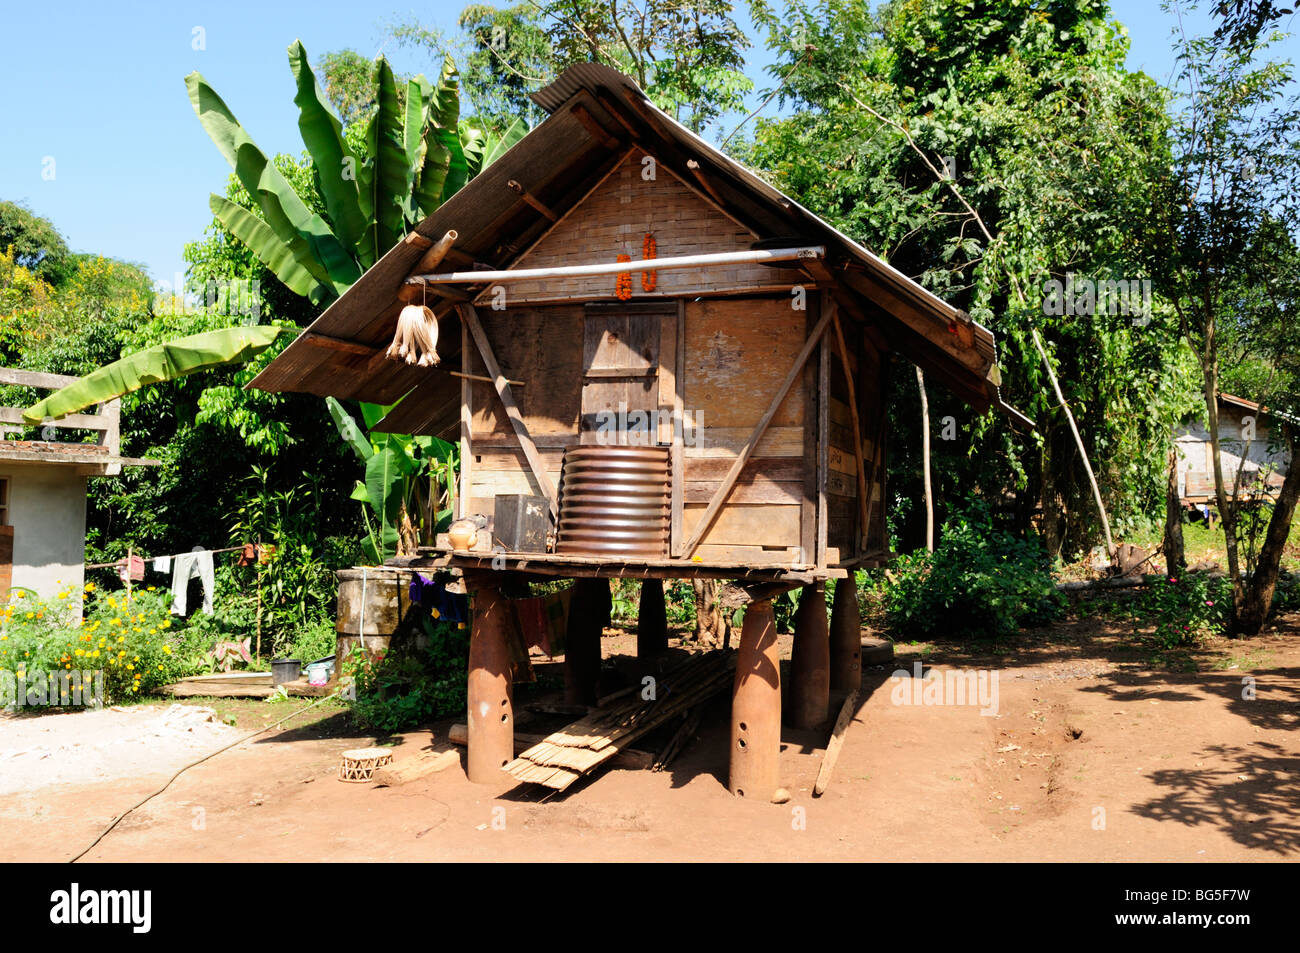 Laos; Bokeo province; Hut built on 500Kg bomb casings from the 1970's Indochina War, Located in a village near Huay Xai Stock Photo